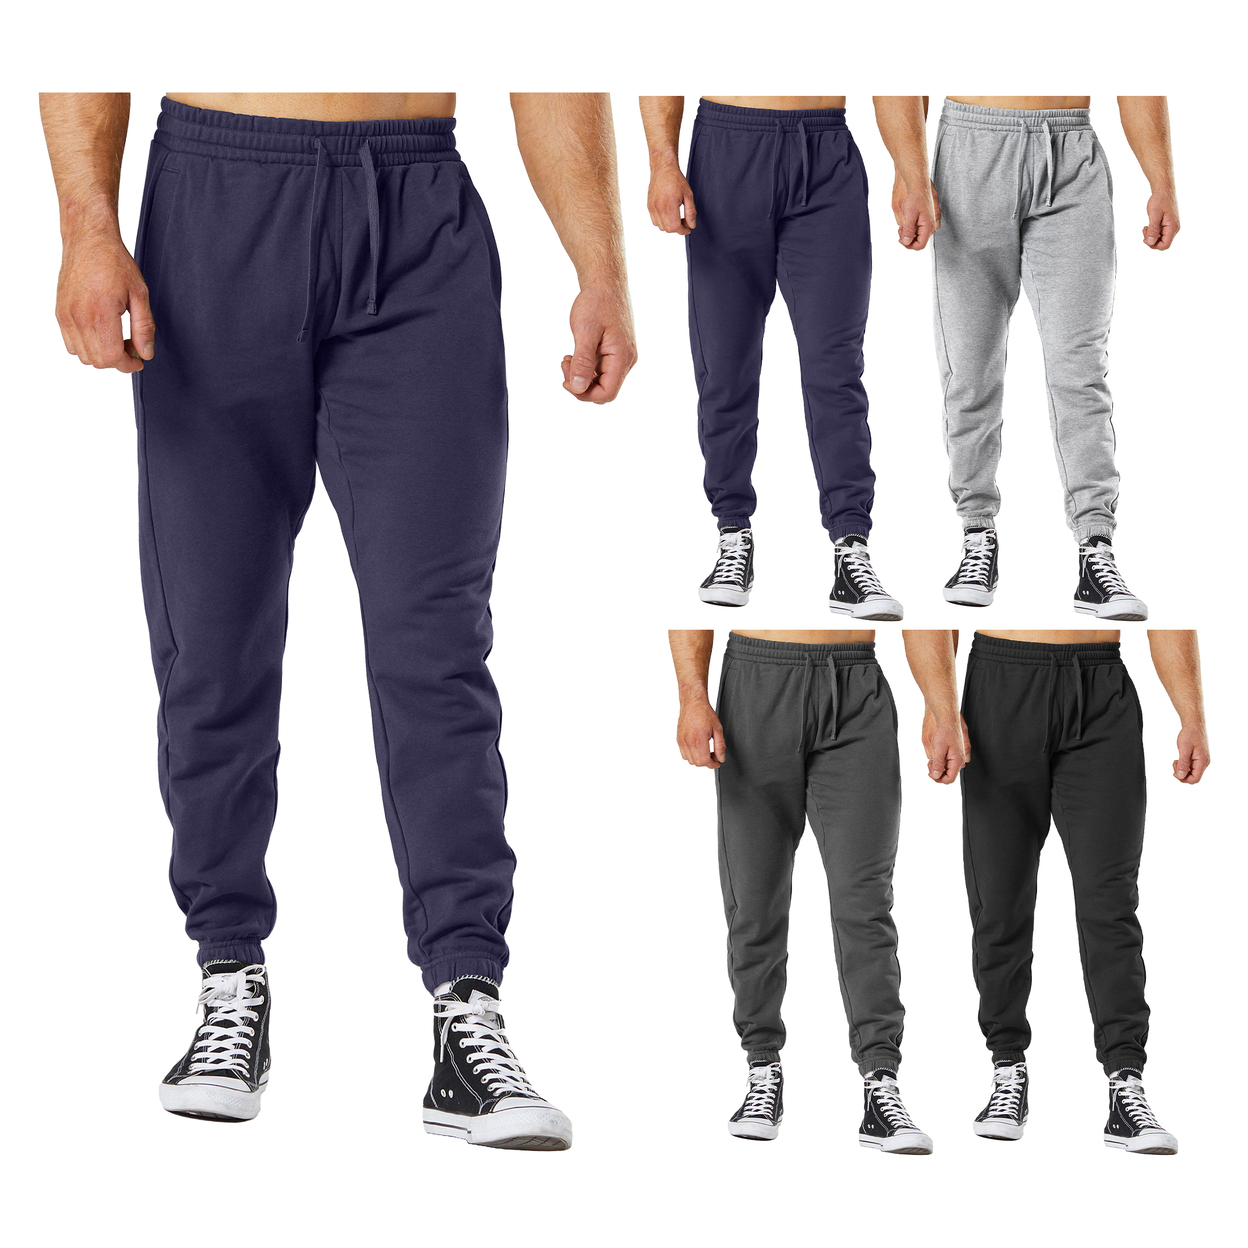 Multi-Pack: Men's Ultra-Soft Cozy Winter Warm Casual Fleece-Lined Sweatpants Jogger - 1-pack, Large